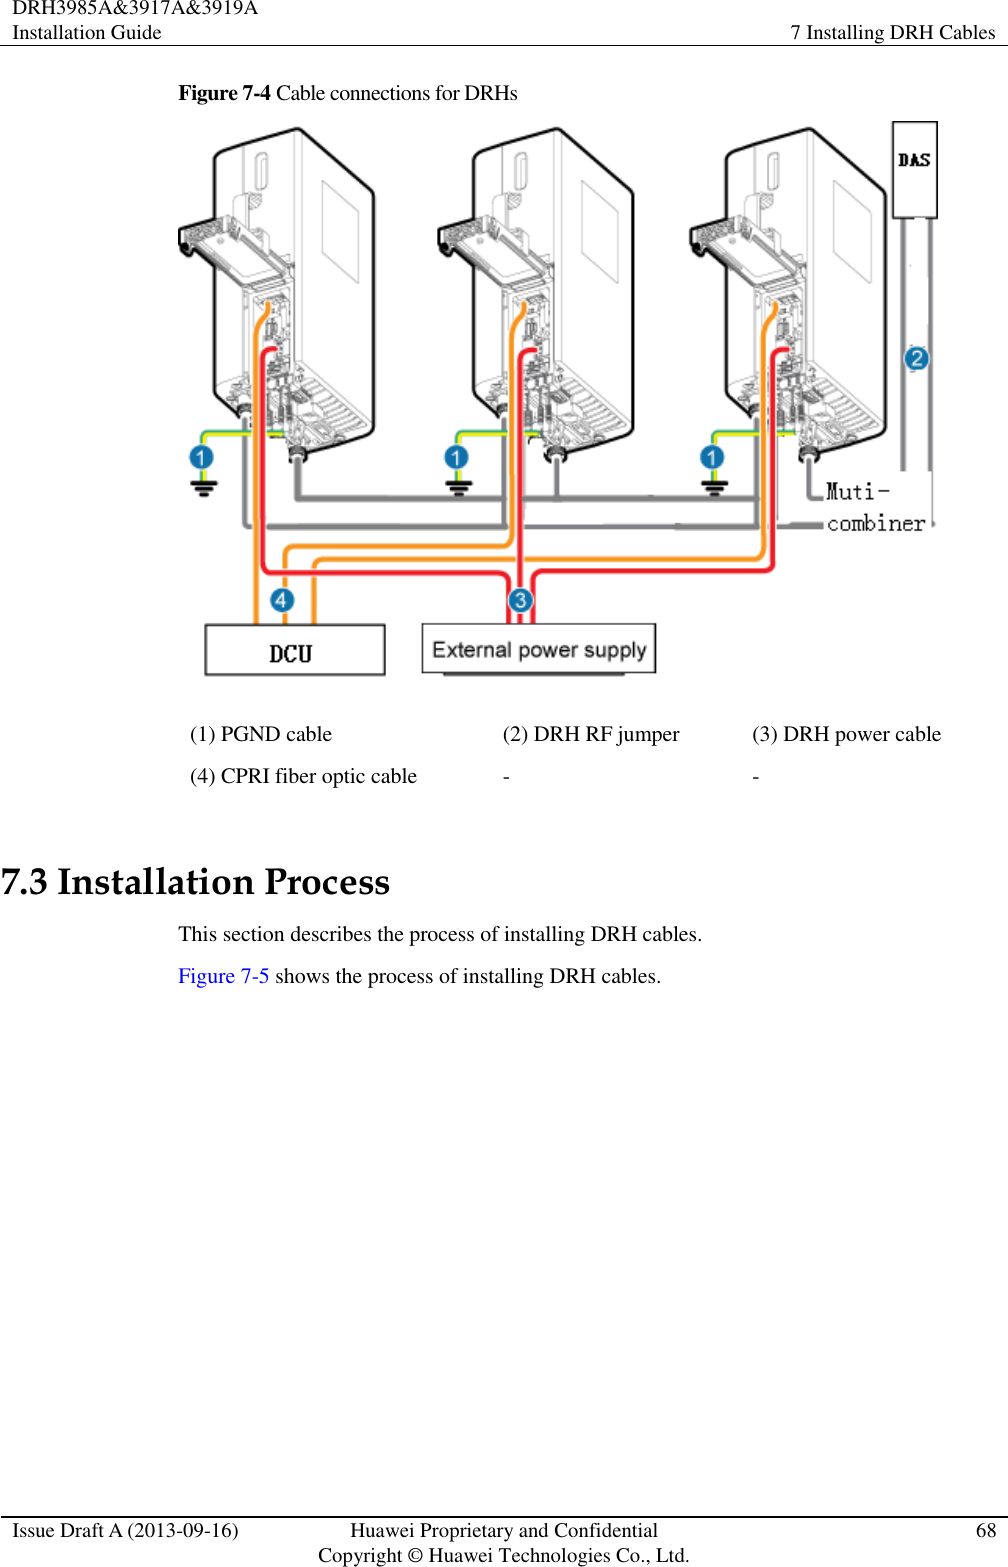 DRH3985A&amp;3917A&amp;3919A Installation Guide 7 Installing DRH Cables  Issue Draft A (2013-09-16) Huawei Proprietary and Confidential                                     Copyright © Huawei Technologies Co., Ltd. 68  Figure 7-4 Cable connections for DRHs  (1) PGND cable (2) DRH RF jumper (3) DRH power cable (4) CPRI fiber optic cable - - 7.3 Installation Process This section describes the process of installing DRH cables. Figure 7-5 shows the process of installing DRH cables. 